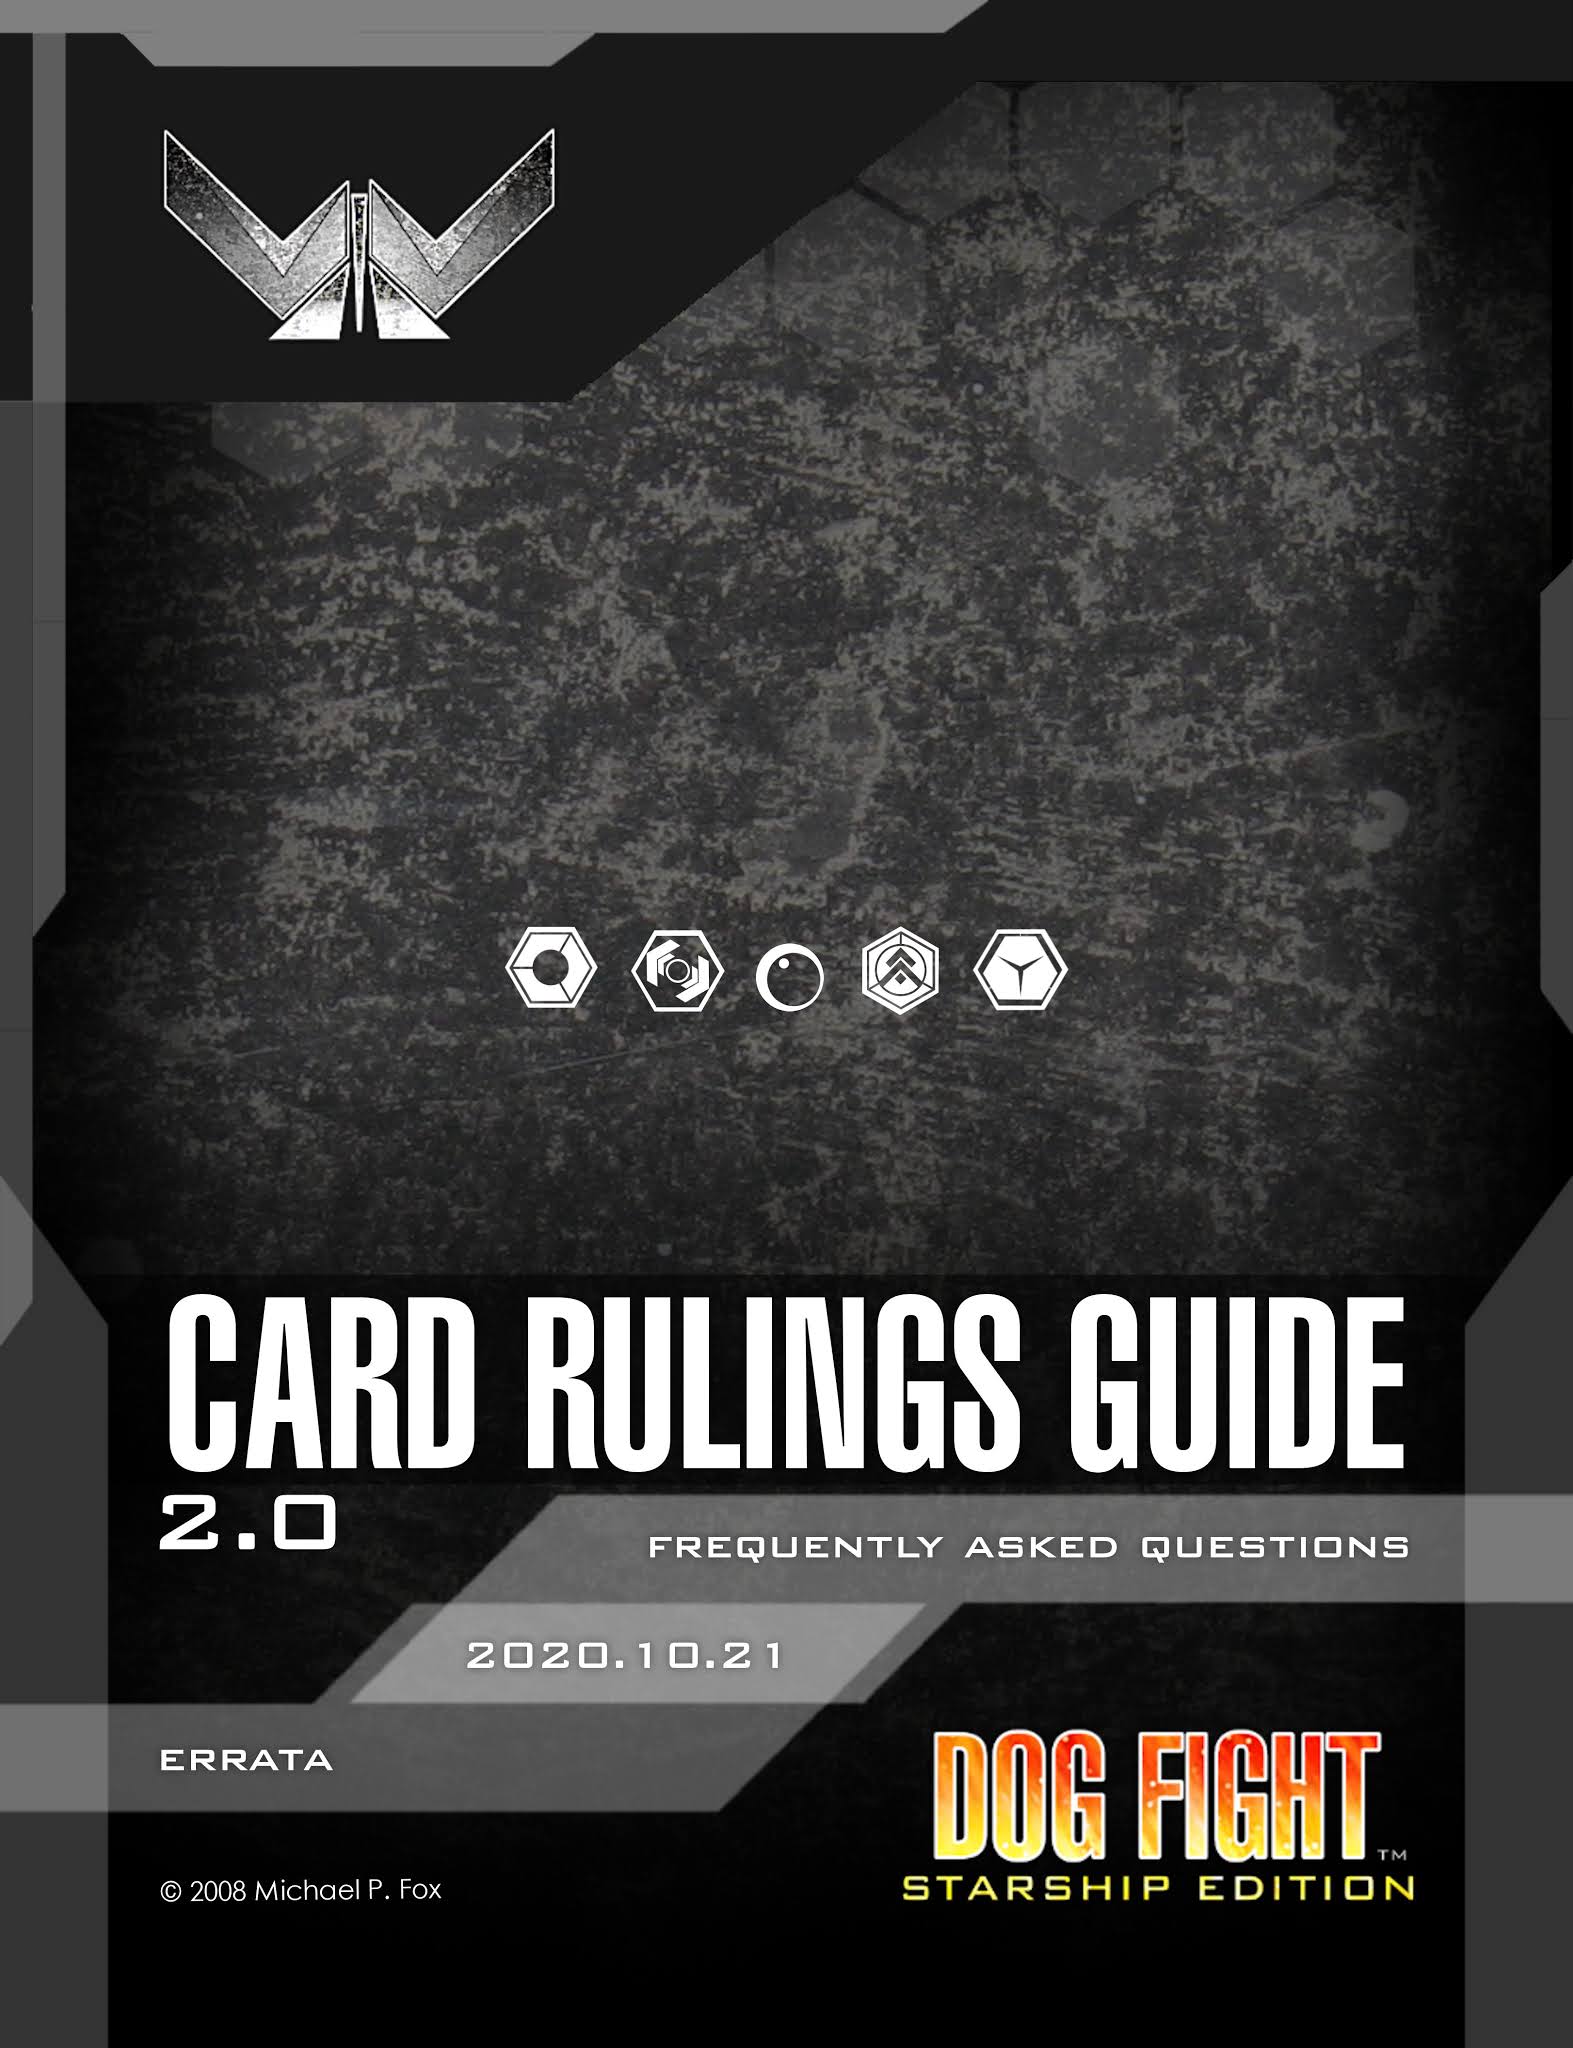 Dog Fight: Starship Edition card rulings guide